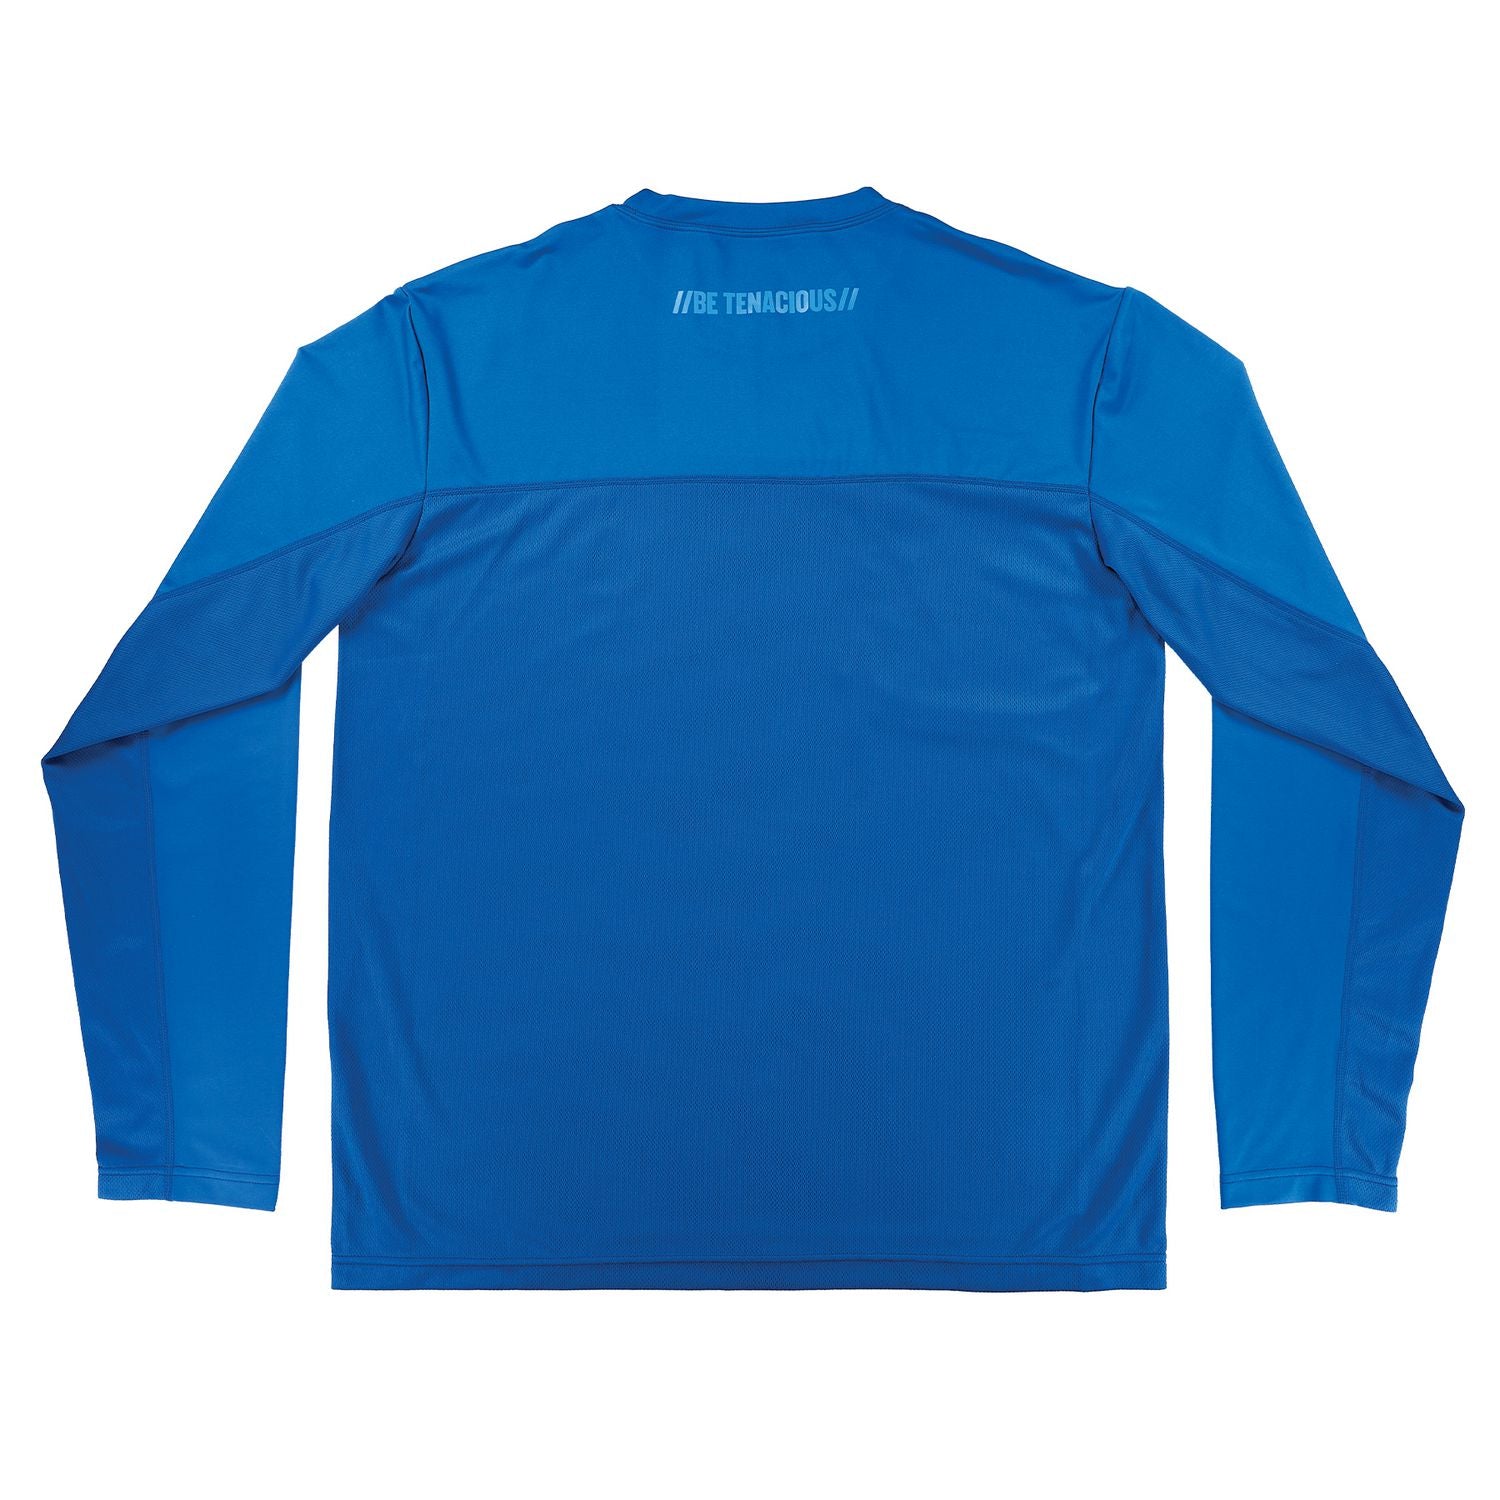 chill-its-6689-cooling-long-sleeve-sun-shirt-with-uv-protection-3x-large-blue-ships-in-1-3-business-days_ego12157 - 2